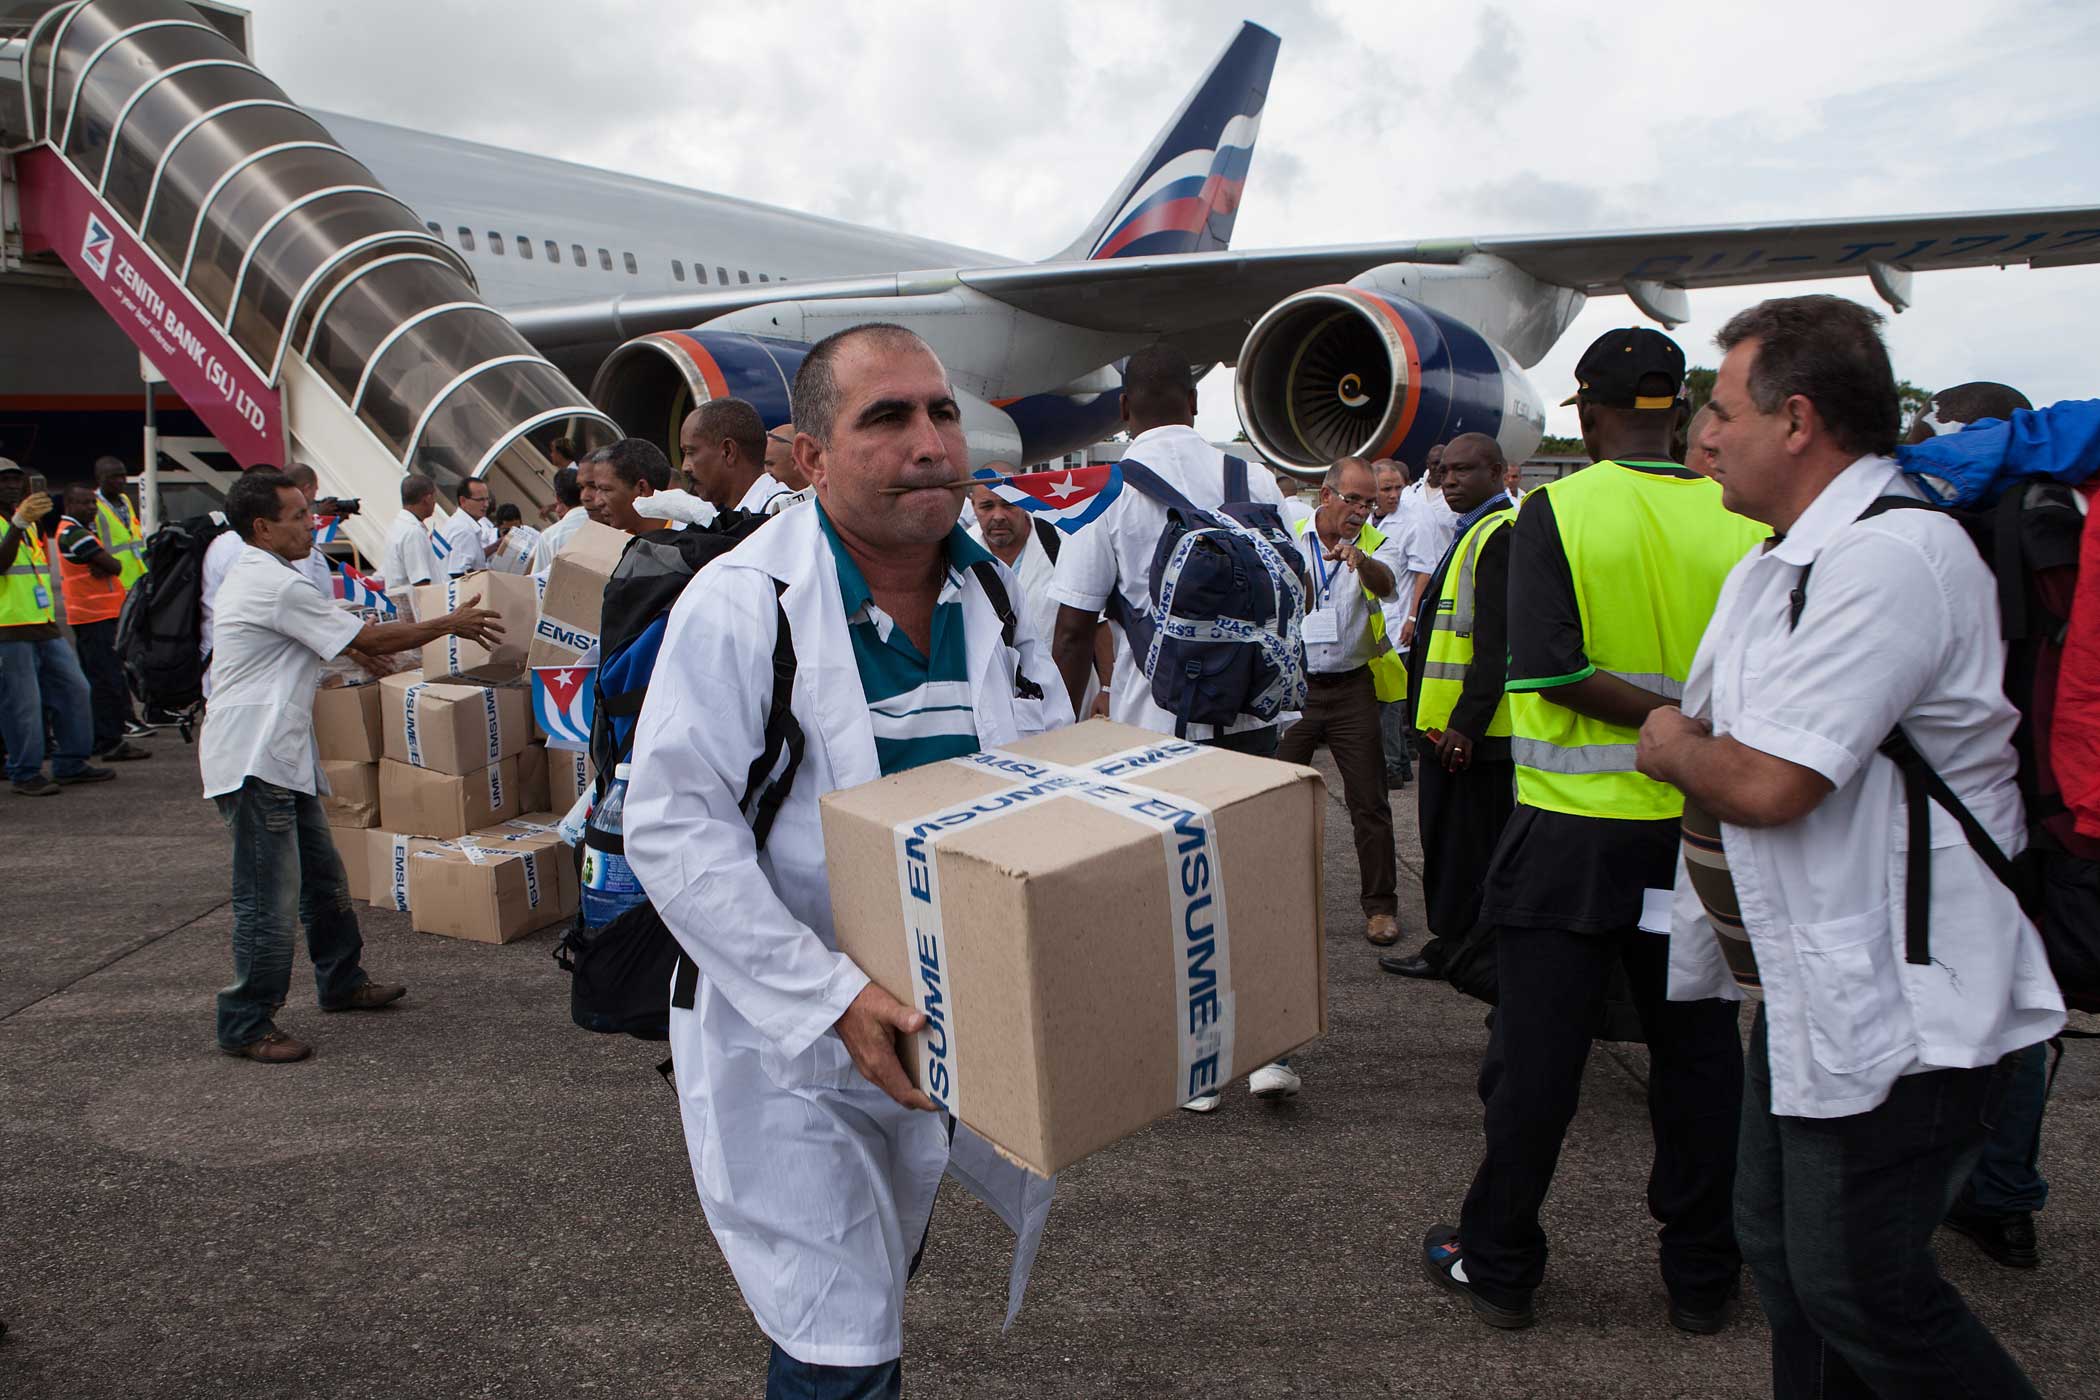 The first members of a team of 165 Cuban doctors and health workers unload boxes of medicines and medical material from a plane upon their arrival at Freetown's airport to help the fight against Ebola in Sierra Leone, on October 2, 2014. (Florian Plaucheur—AFP/Getty Images)